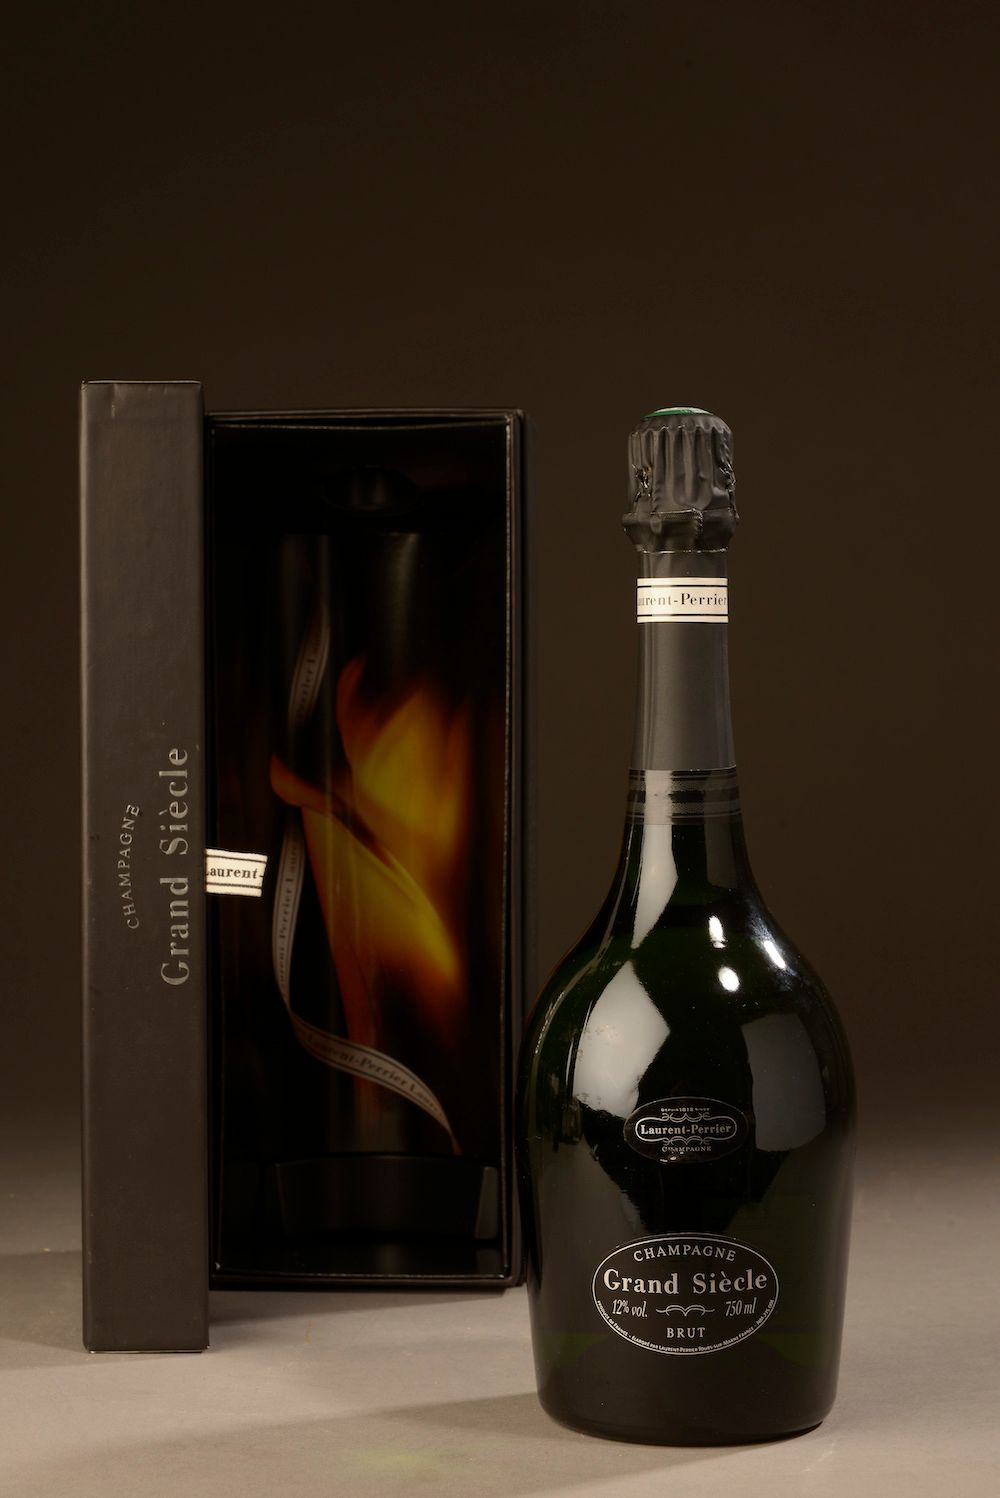 Null 1 bottle CHAMPAGNE "Grand Siècle", Laurent-Perrier (boxed set)